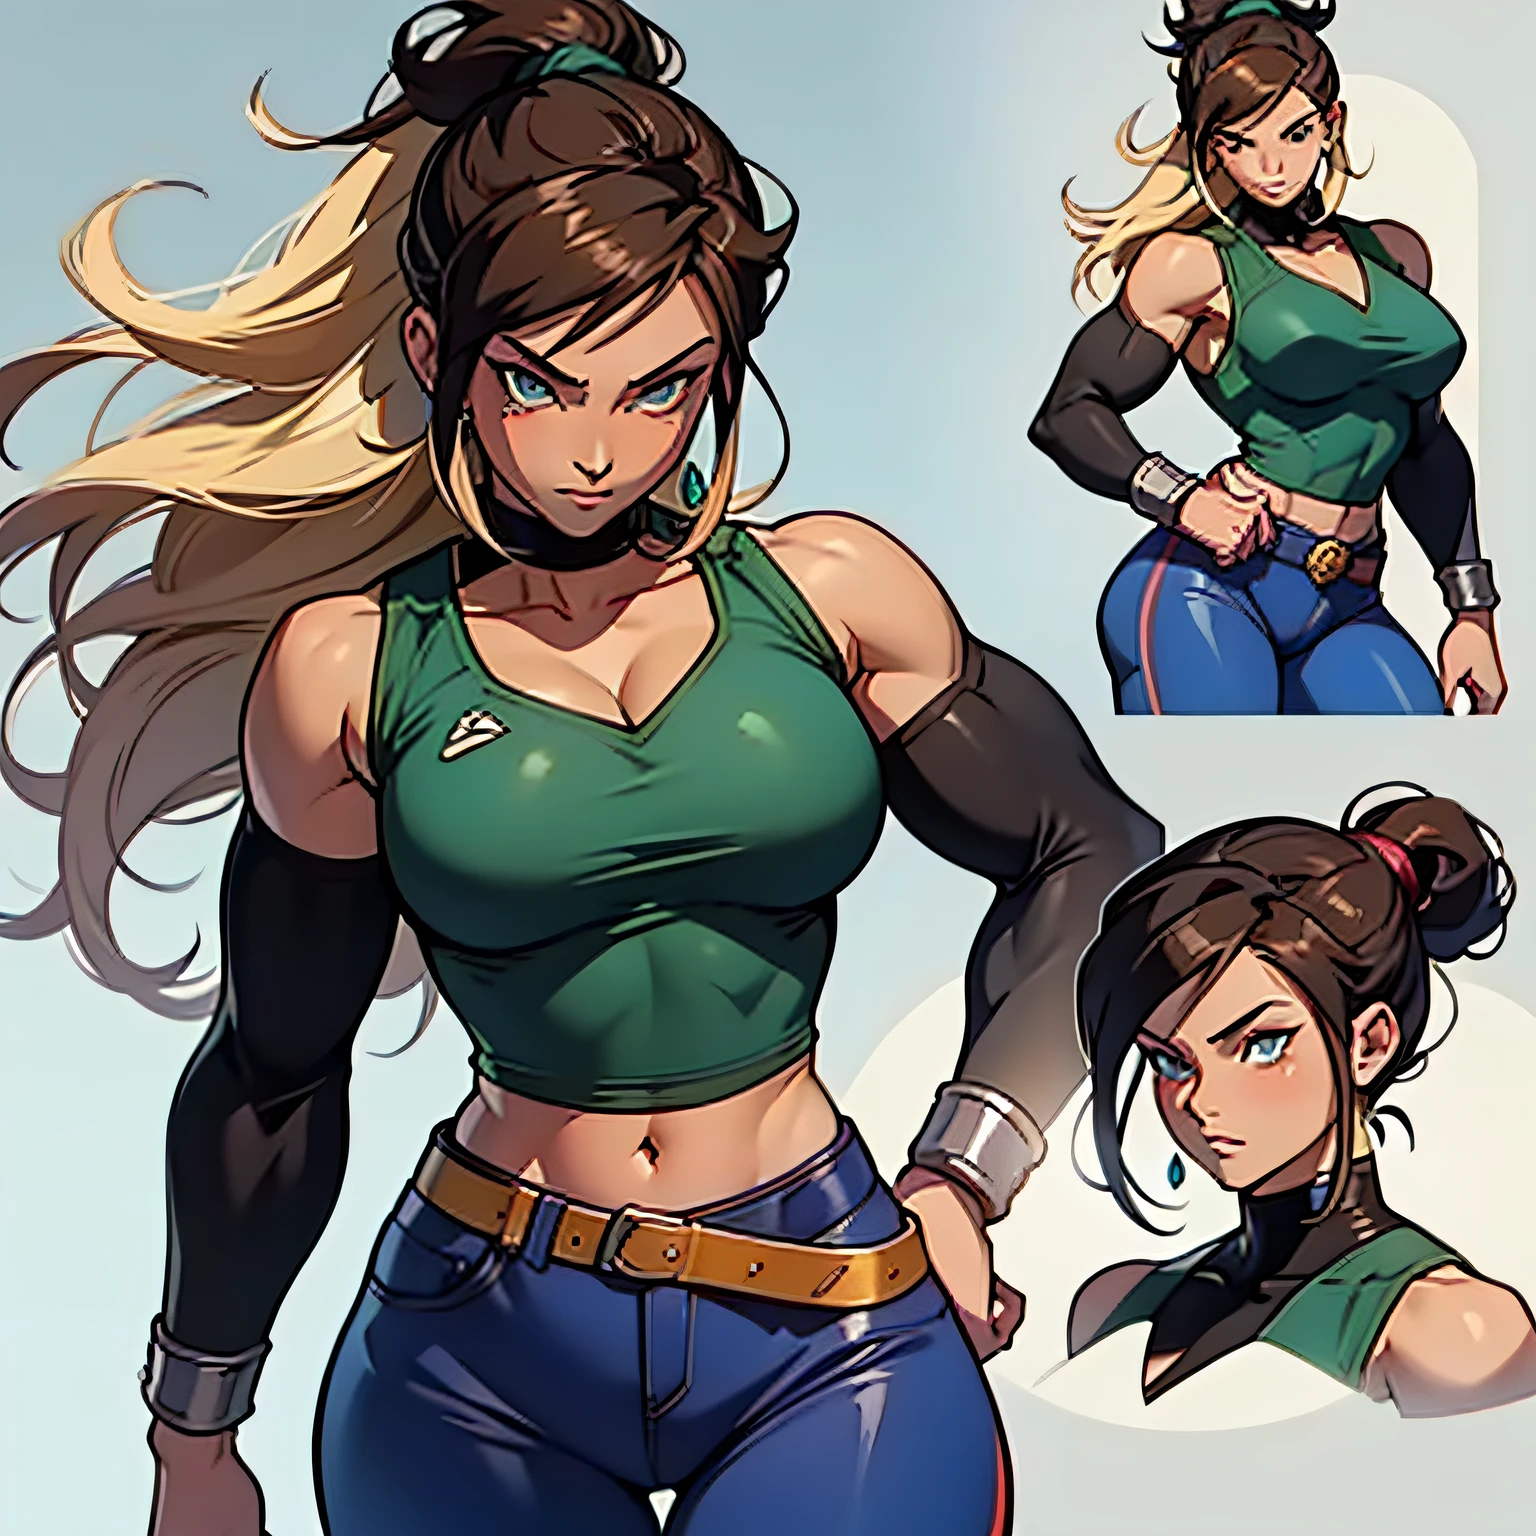 Create a striking character concept art of a muscular female Saiyan, drawing inspiration from the design elements of Korra in "The Legend of Korra." In this Saiyan style rendition, she is adorned in a blue shirt, blue pants with a white top, and possesses intense blue eyes. Her defining feature is her uncut, flowing blonde hair that symbolizes both her beauty and strength.

Immerse this character in the epic and iconic style of 80s anime, capturing the essence of the best anime character designs. Depict her in a powerful and badass pose, radiating determination and elegance. The artwork should be a full-body representation, rendered in UHD with incredible attention to anatomical correctness and intricate detailing, ensuring its suitability for 4K, 8K, or even 16K resolution.

This character concept is a fusion of Saiyan and Korra aesthetics, exuding unparalleled power and style.